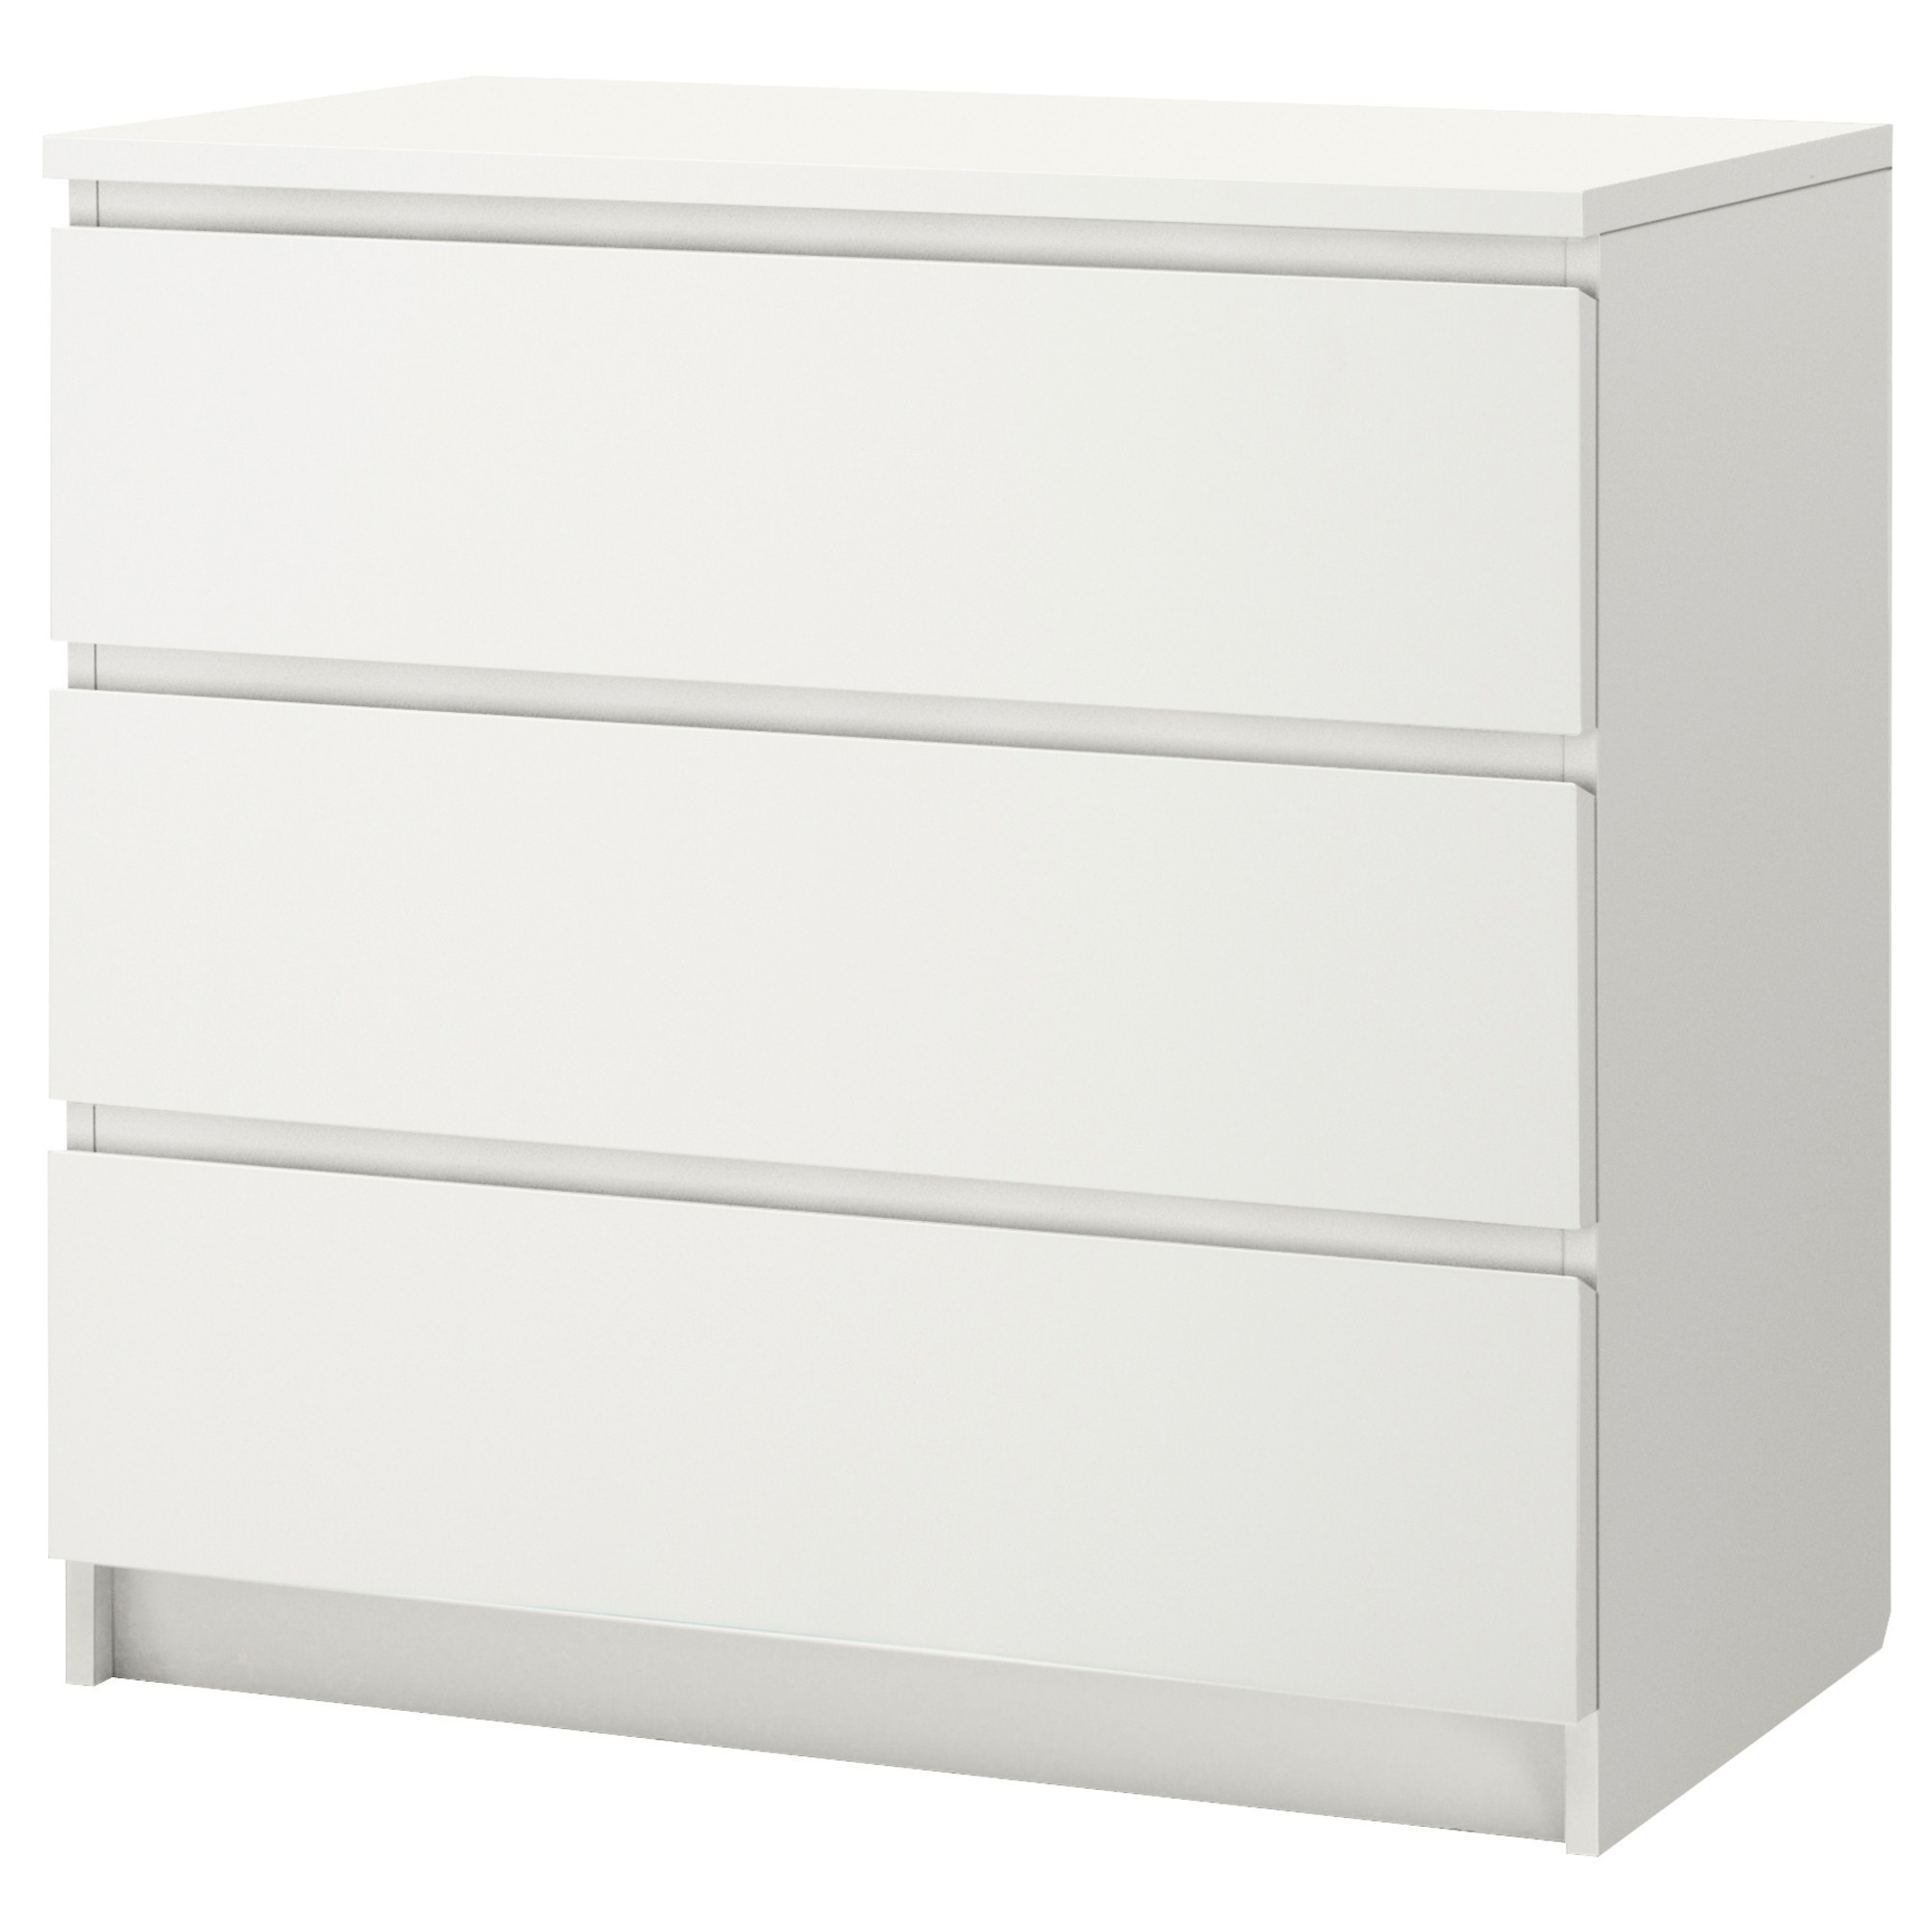 Rent a Drawer cabinet Malm white? Rent at KeyPro furniture rental!